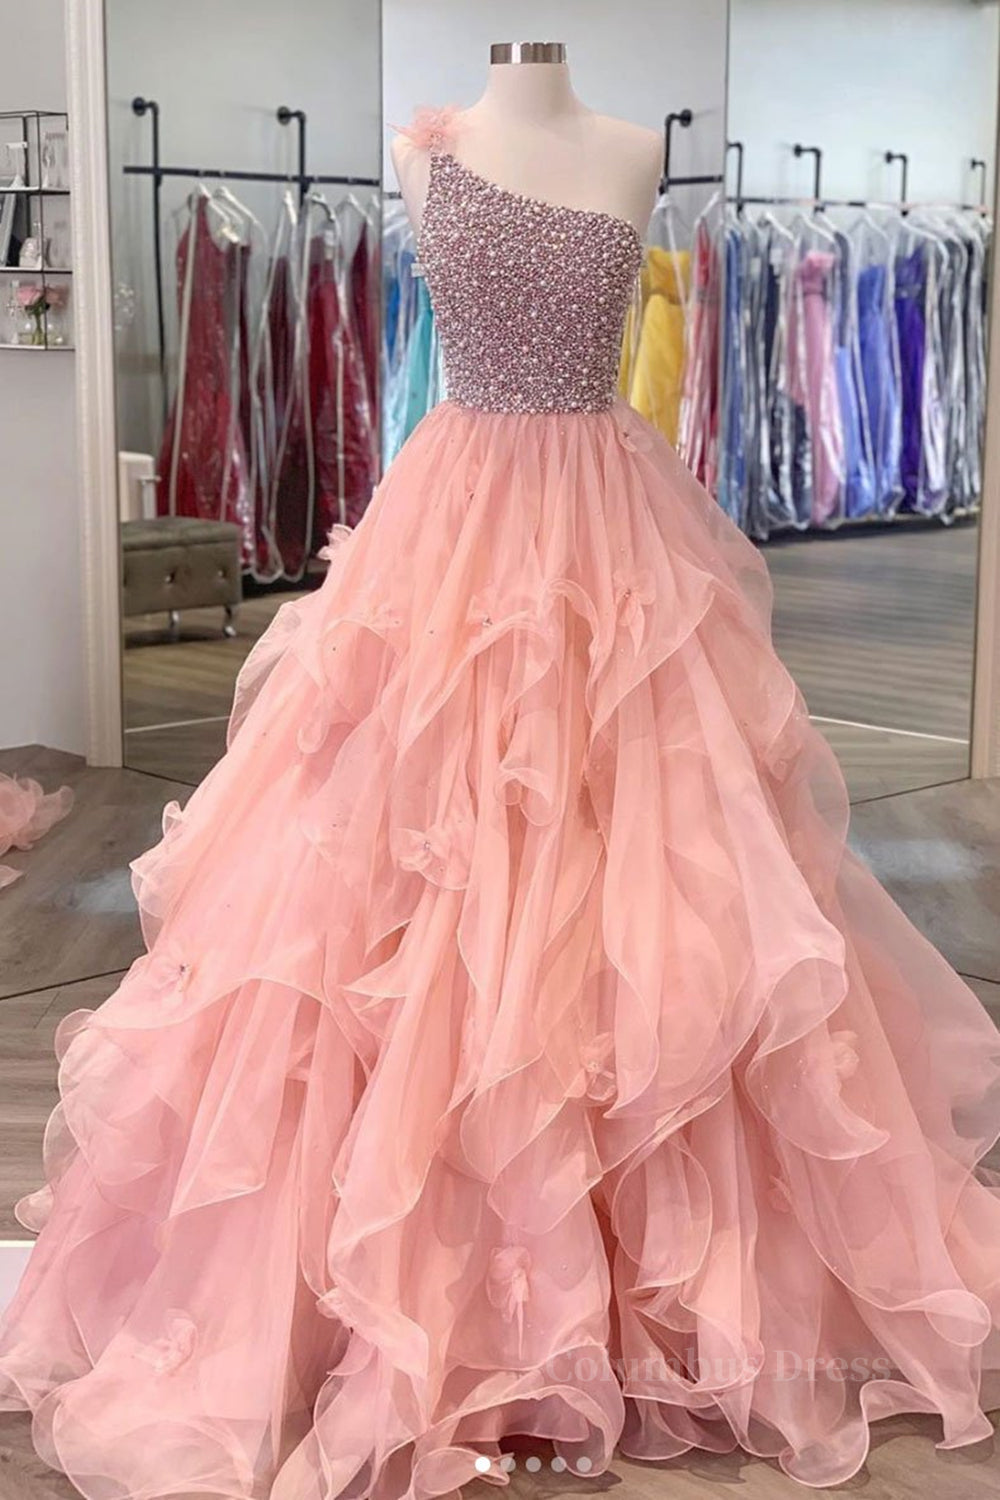 Dress Ideas, Gorgeous One Shoulder Beaded Pink Long Prom Dresses, Fluffy Pink Formal Evening Dresses, Beaded Ball Gown